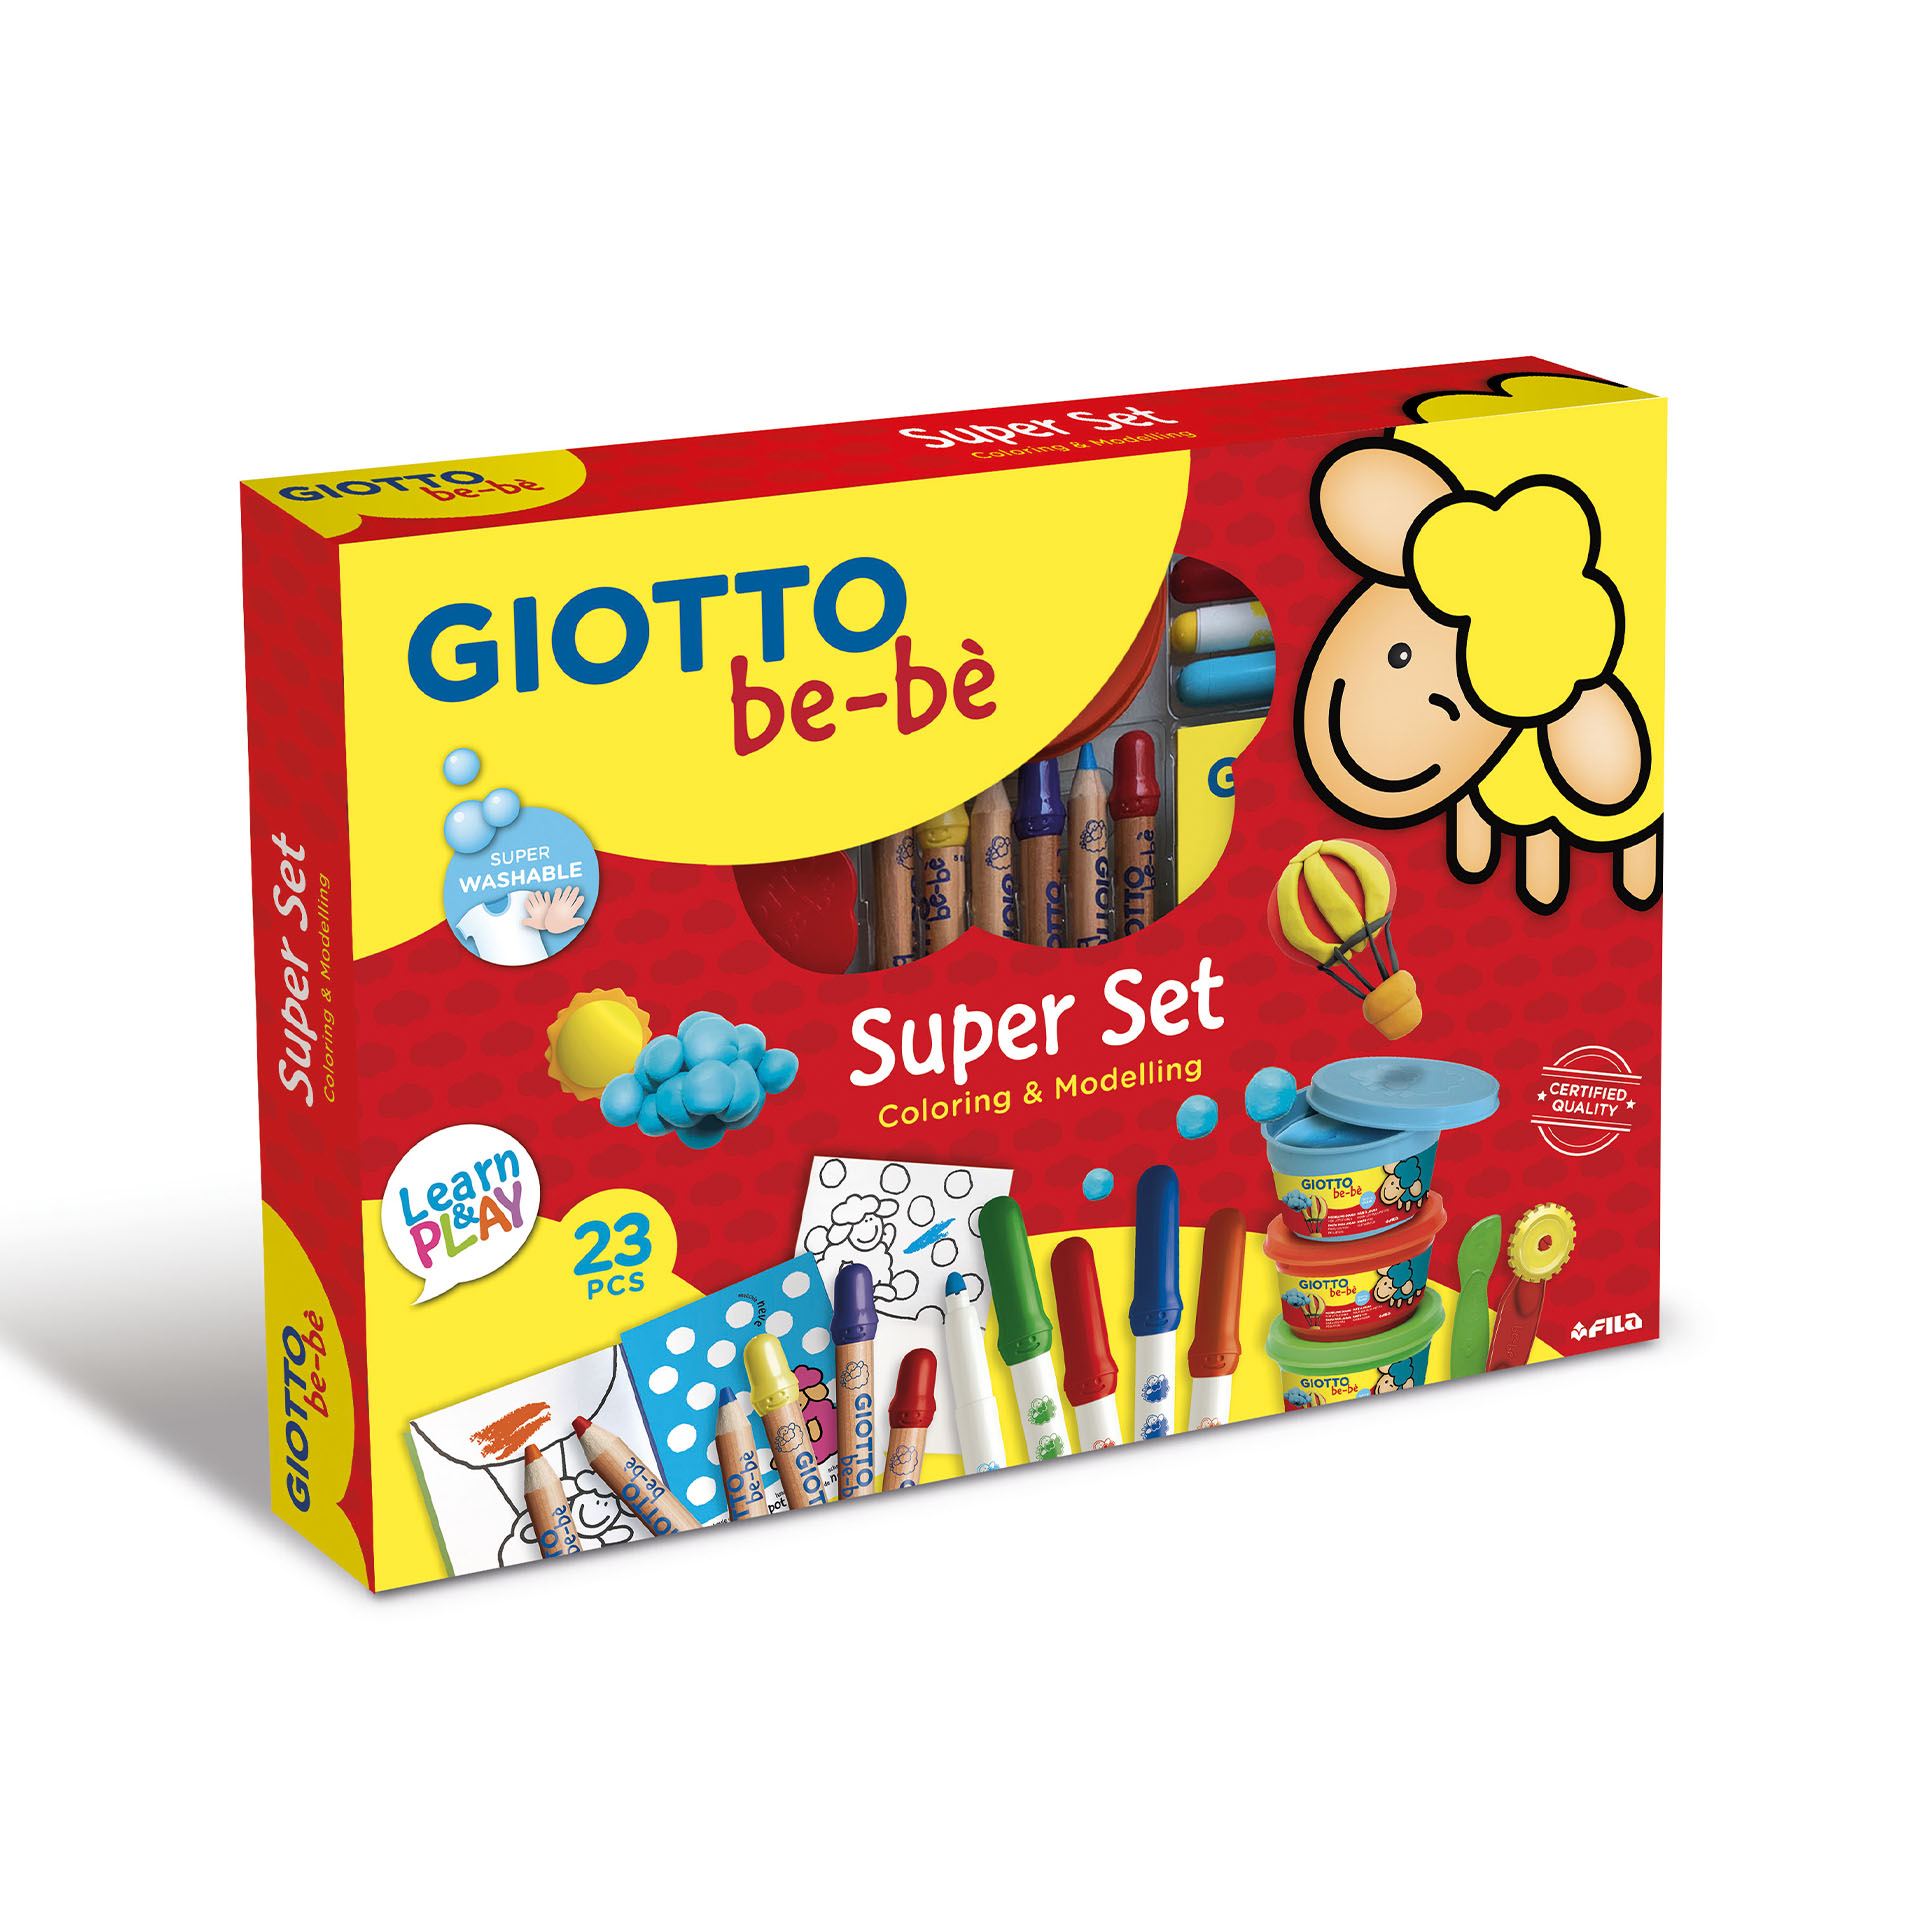 Giotto be-bè My Super Set, , large